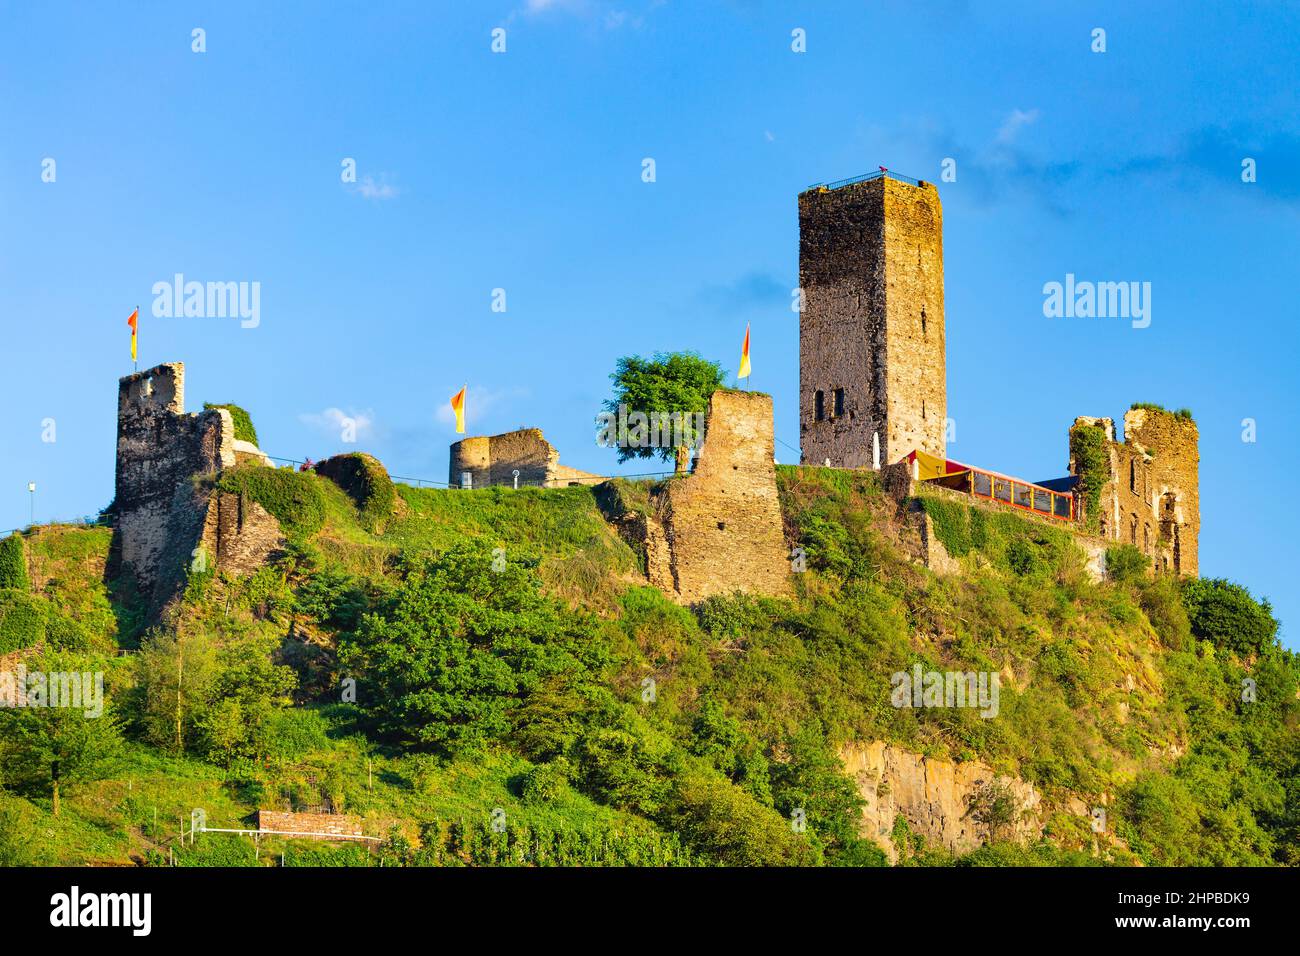 Summer evening view of the castle ruin Metternich in Beilstein in the Moselle Valley, Germany. Stock Photo